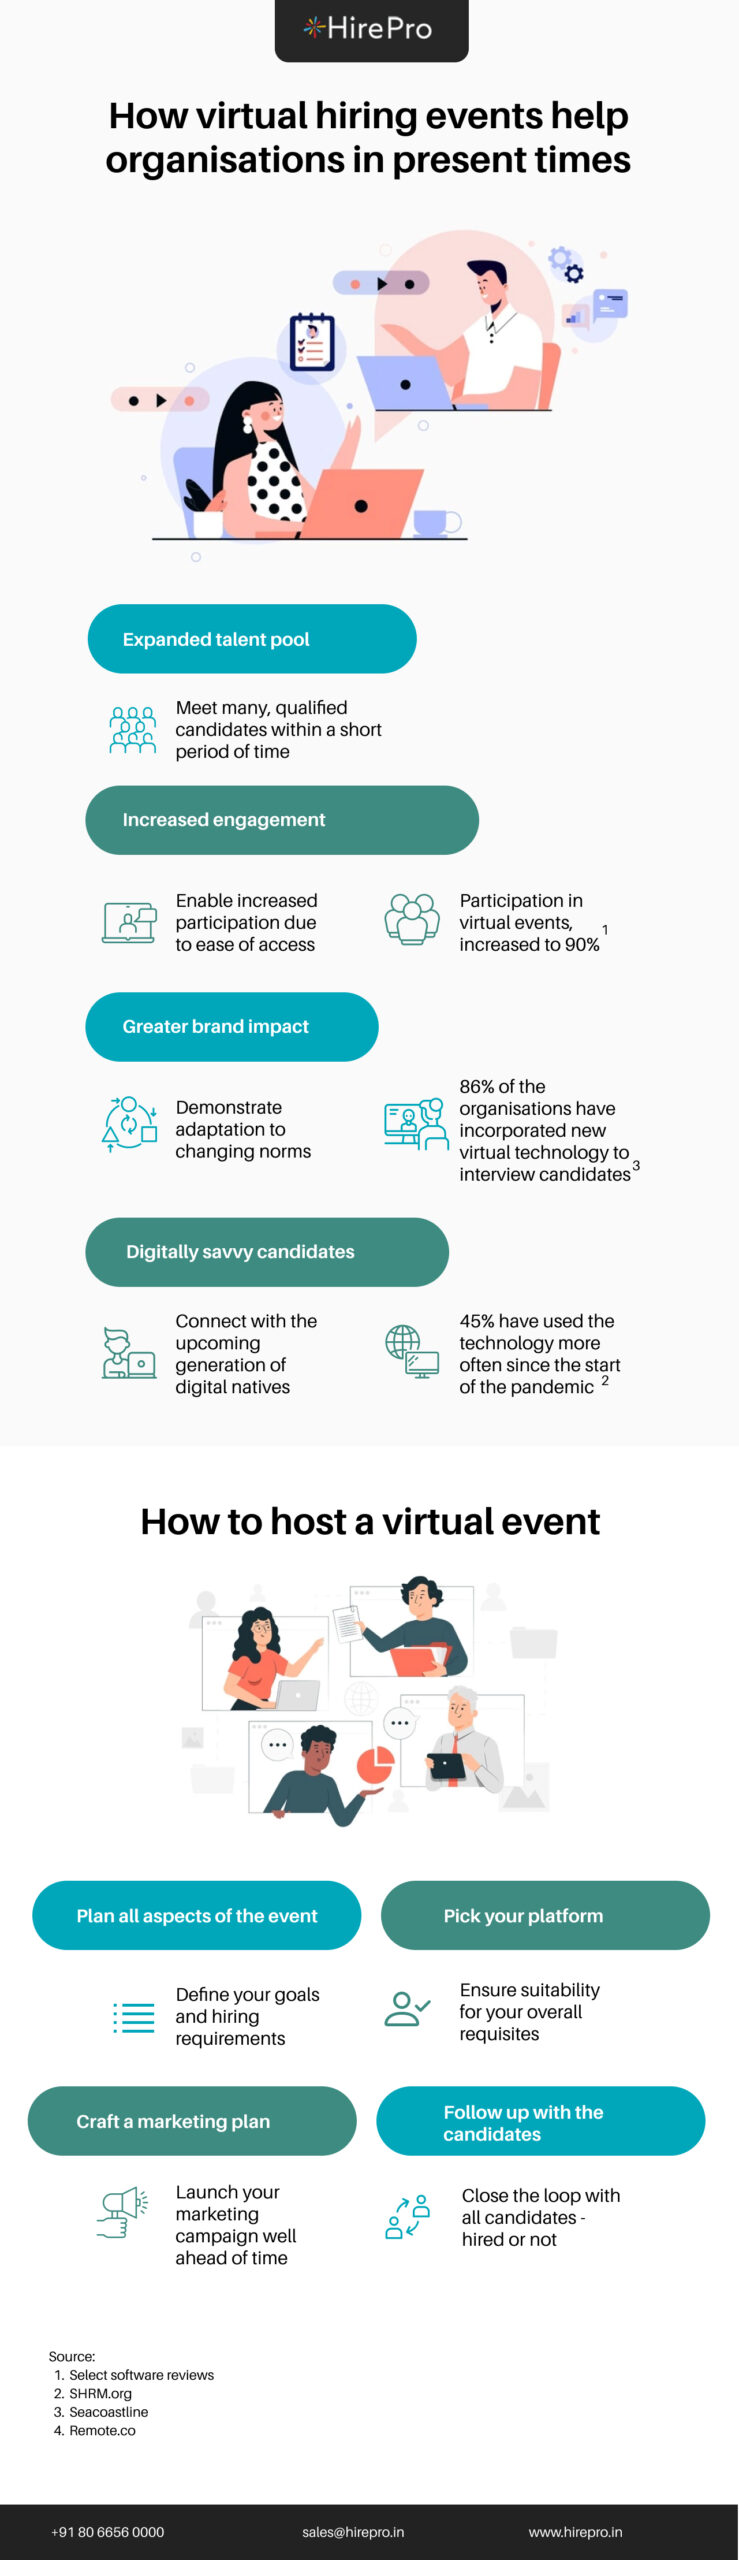 How virtual hiring events help organisations in present times